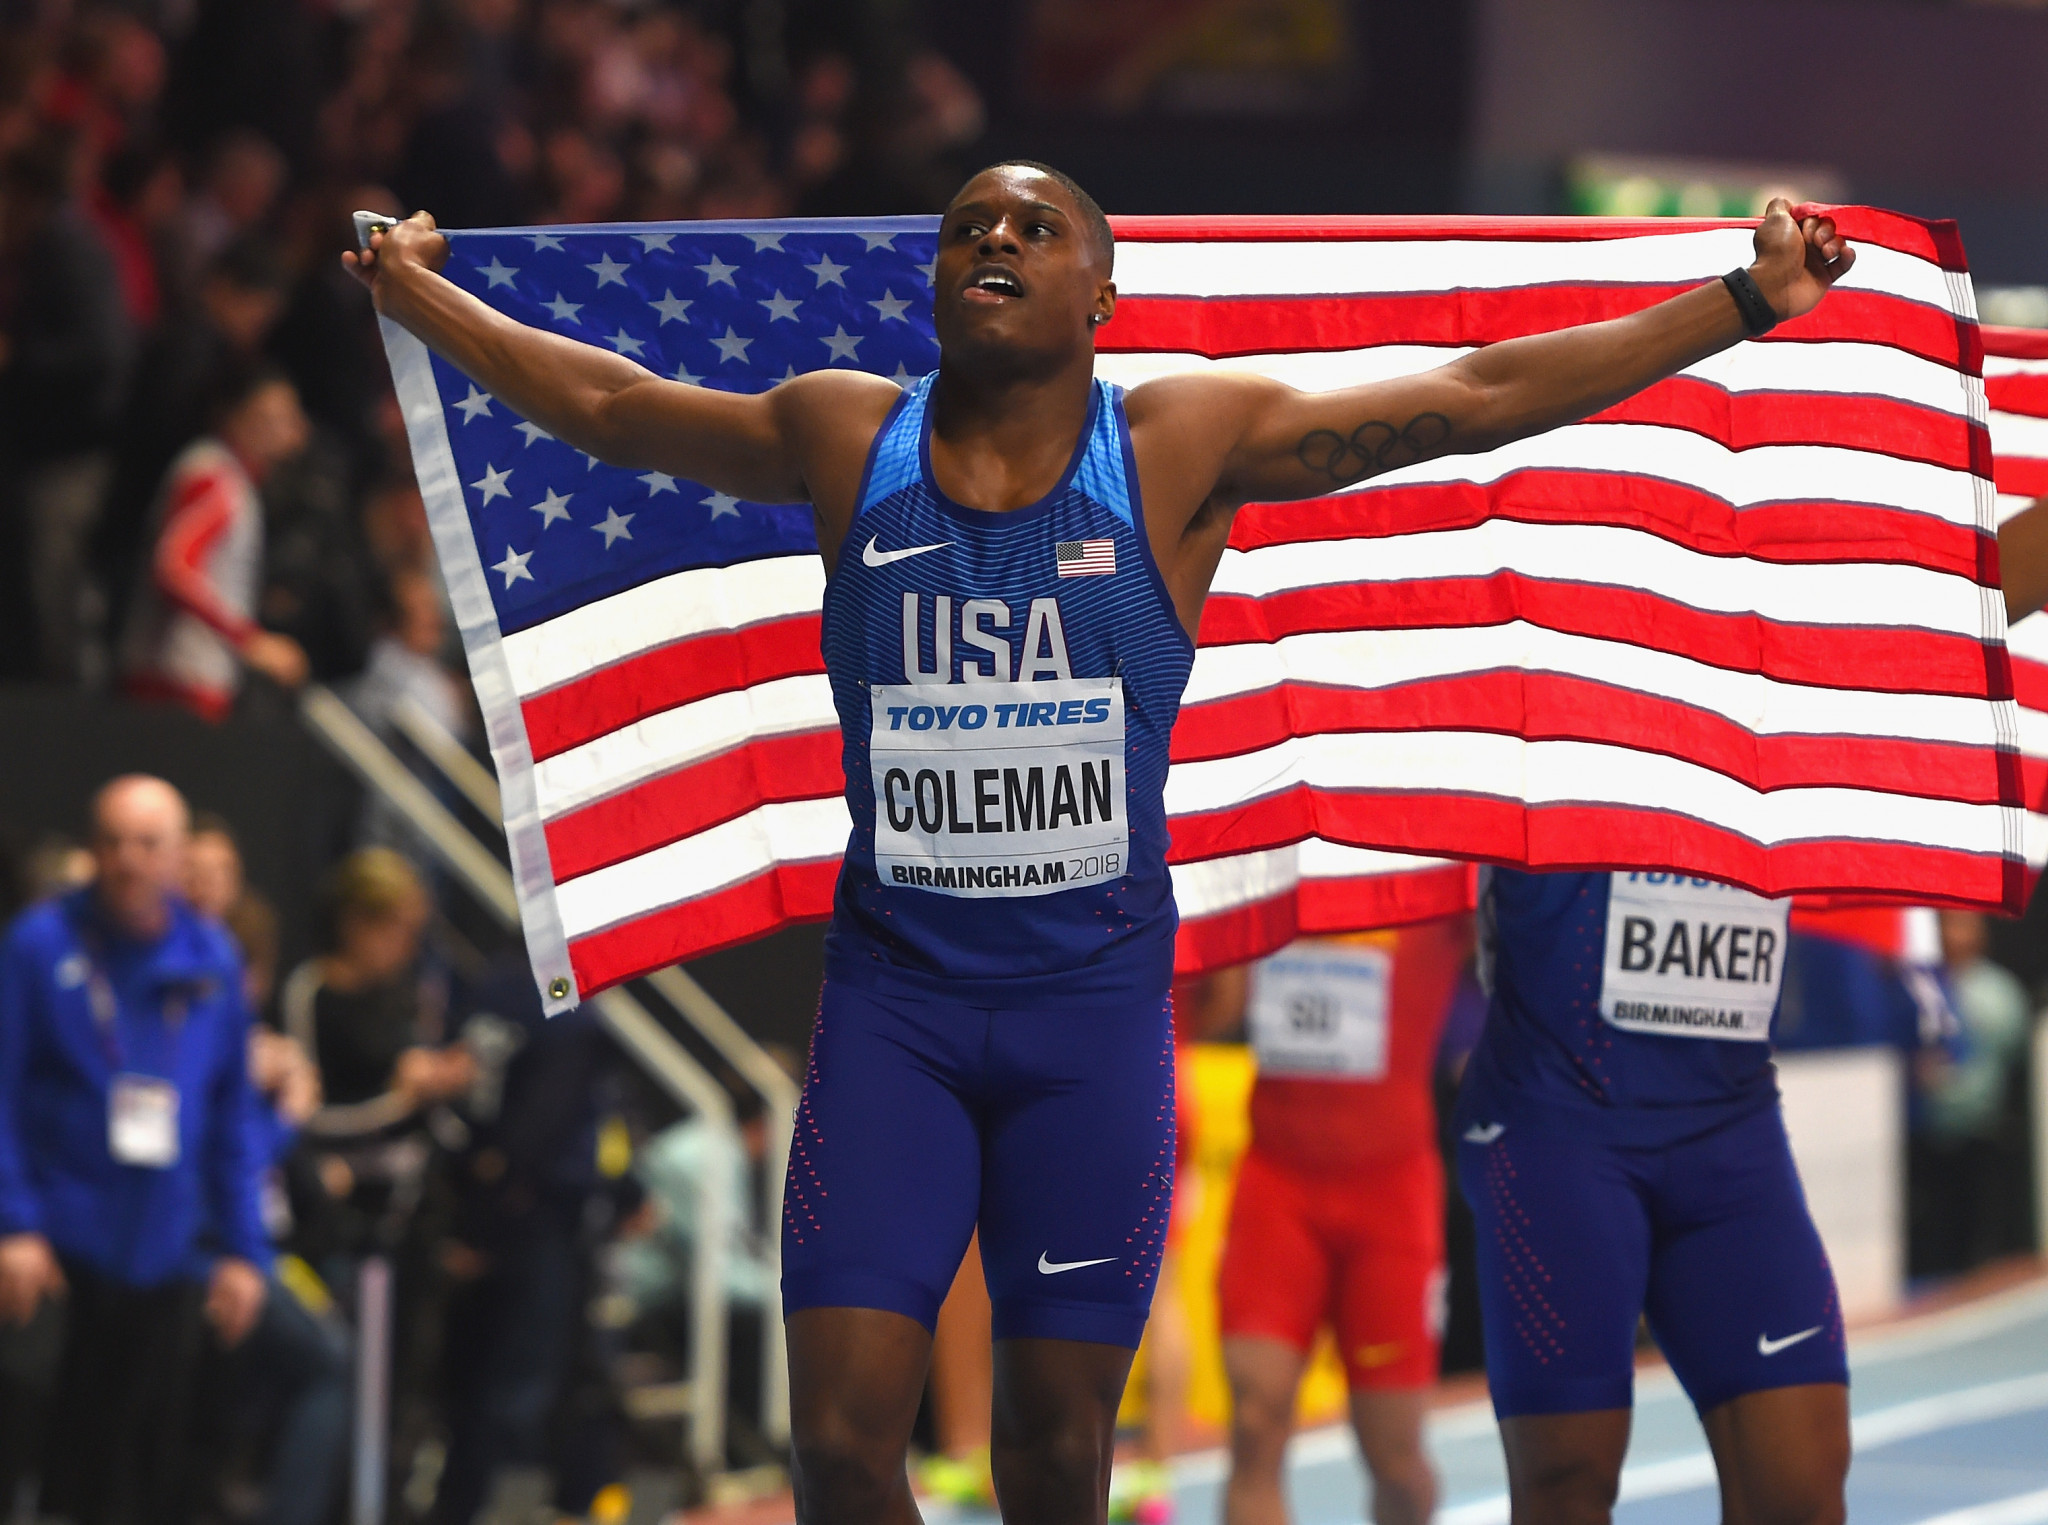 World 100 metres champion Christian Coleman faces a two-year ban for failing to observe whereabouts testing protocols - human error, or irresponsibility? ©Getty Images